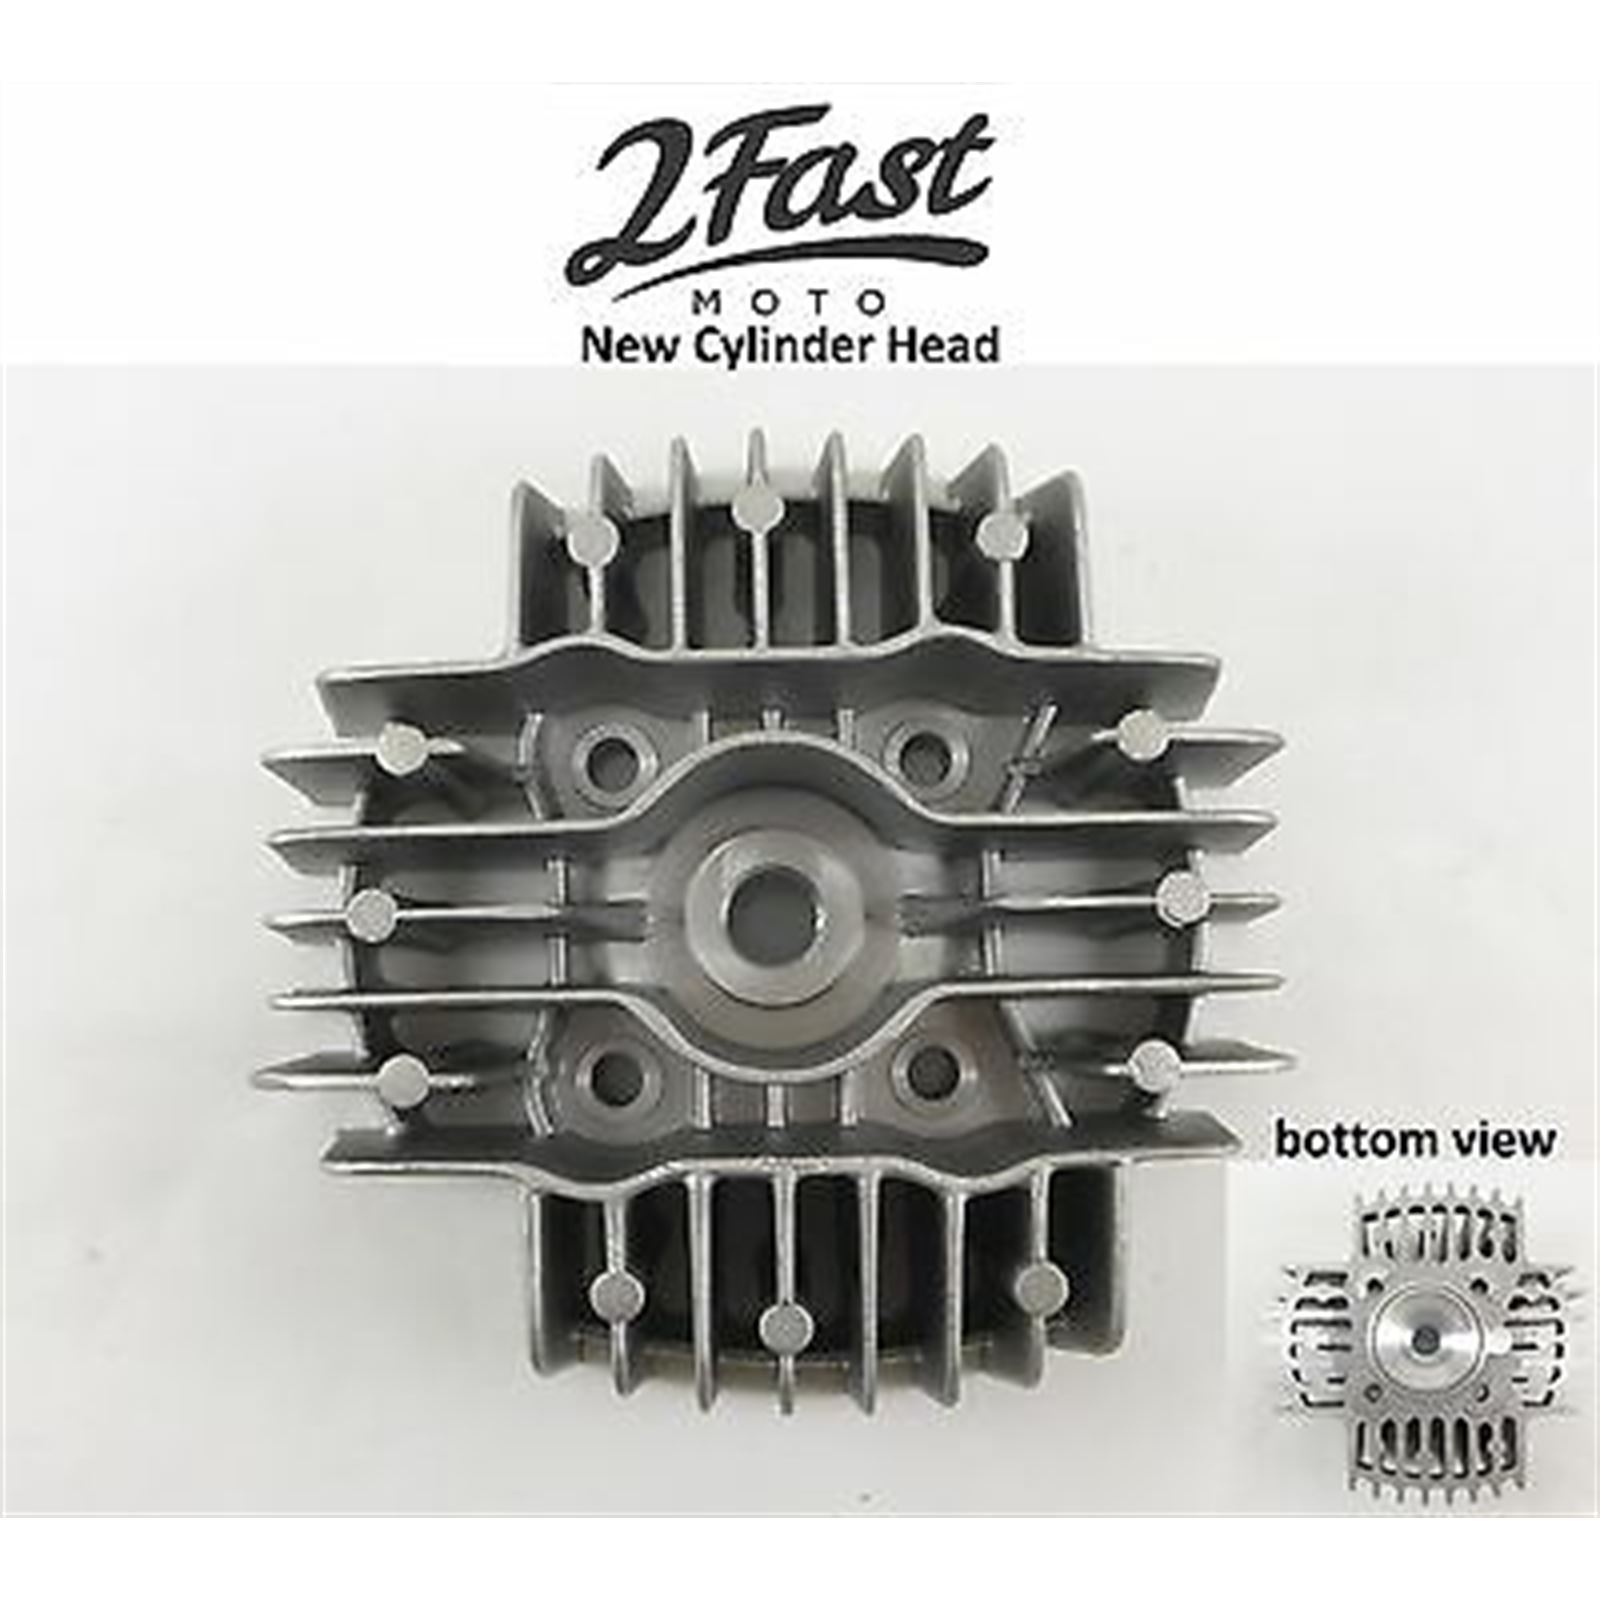 2FastMoto 38mm Cylinder Head 50cc - Puch Maxi Sport Luxe, Newport E50, Magnum MK